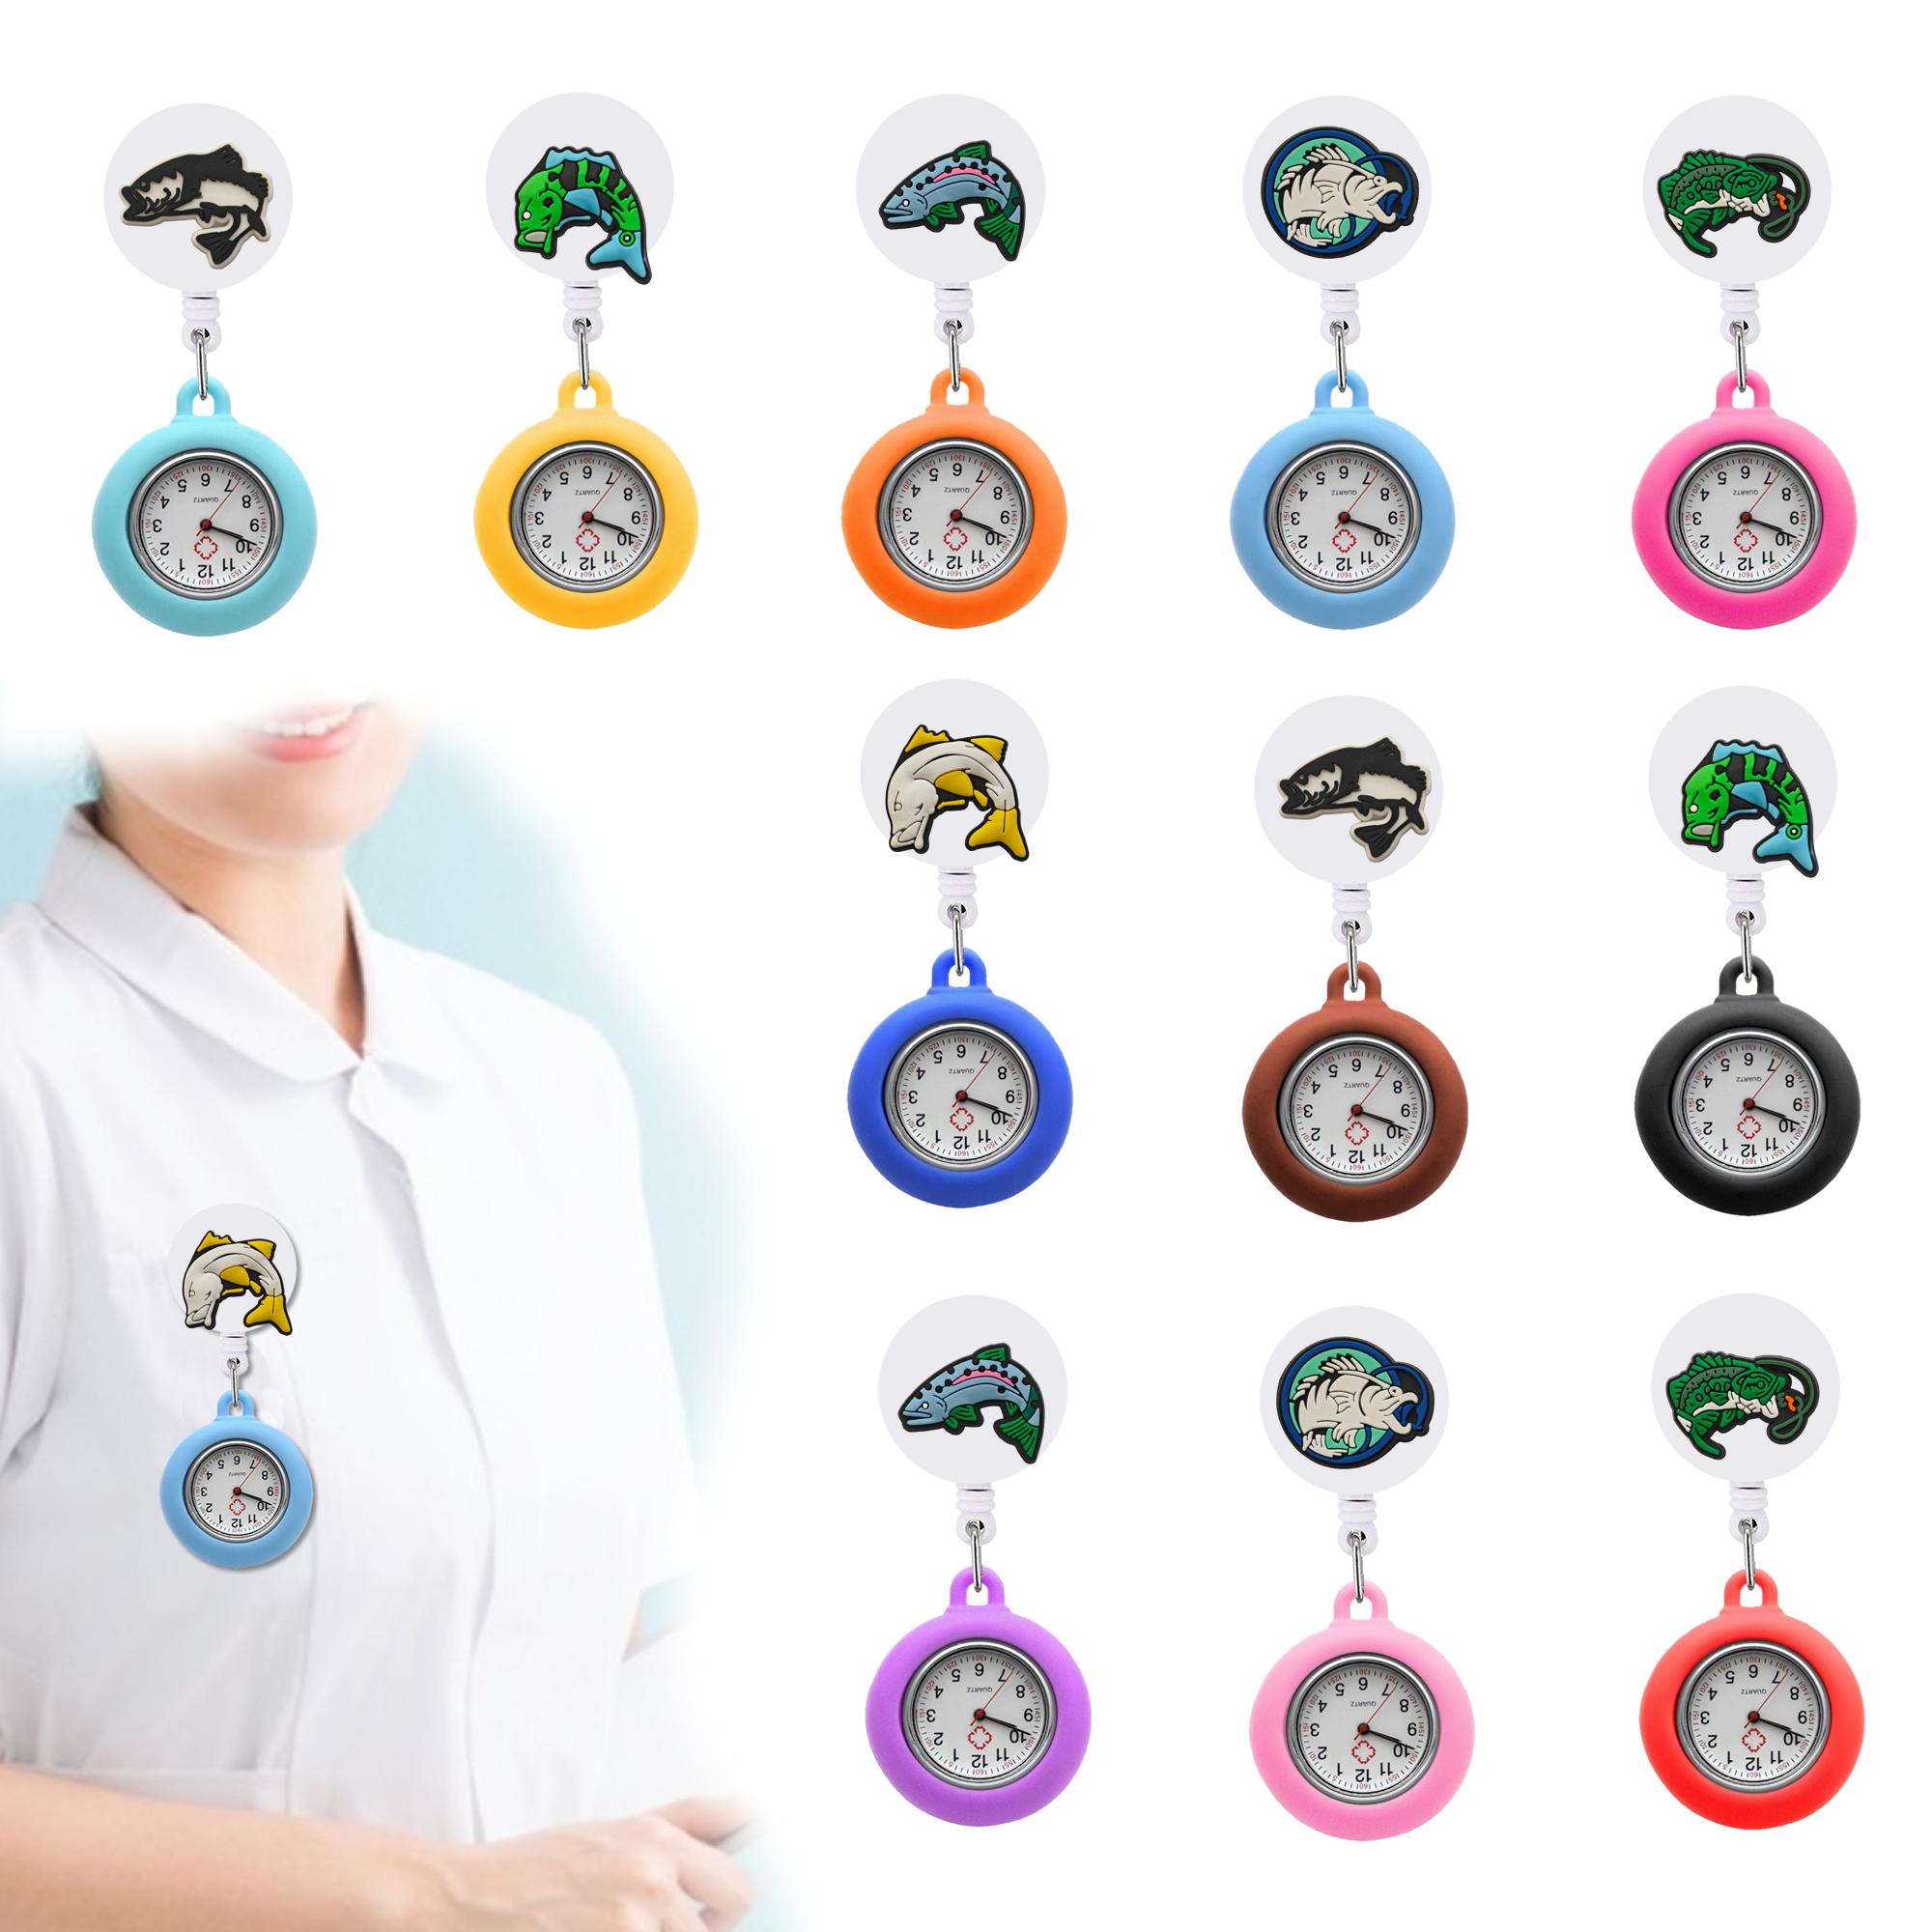 Childrens Watches Fish and Clip Pocket Nurse Watch Broche FOB Watche para Sile Case Hang Medicine Clock Reputable Hospital Med Ot1ty